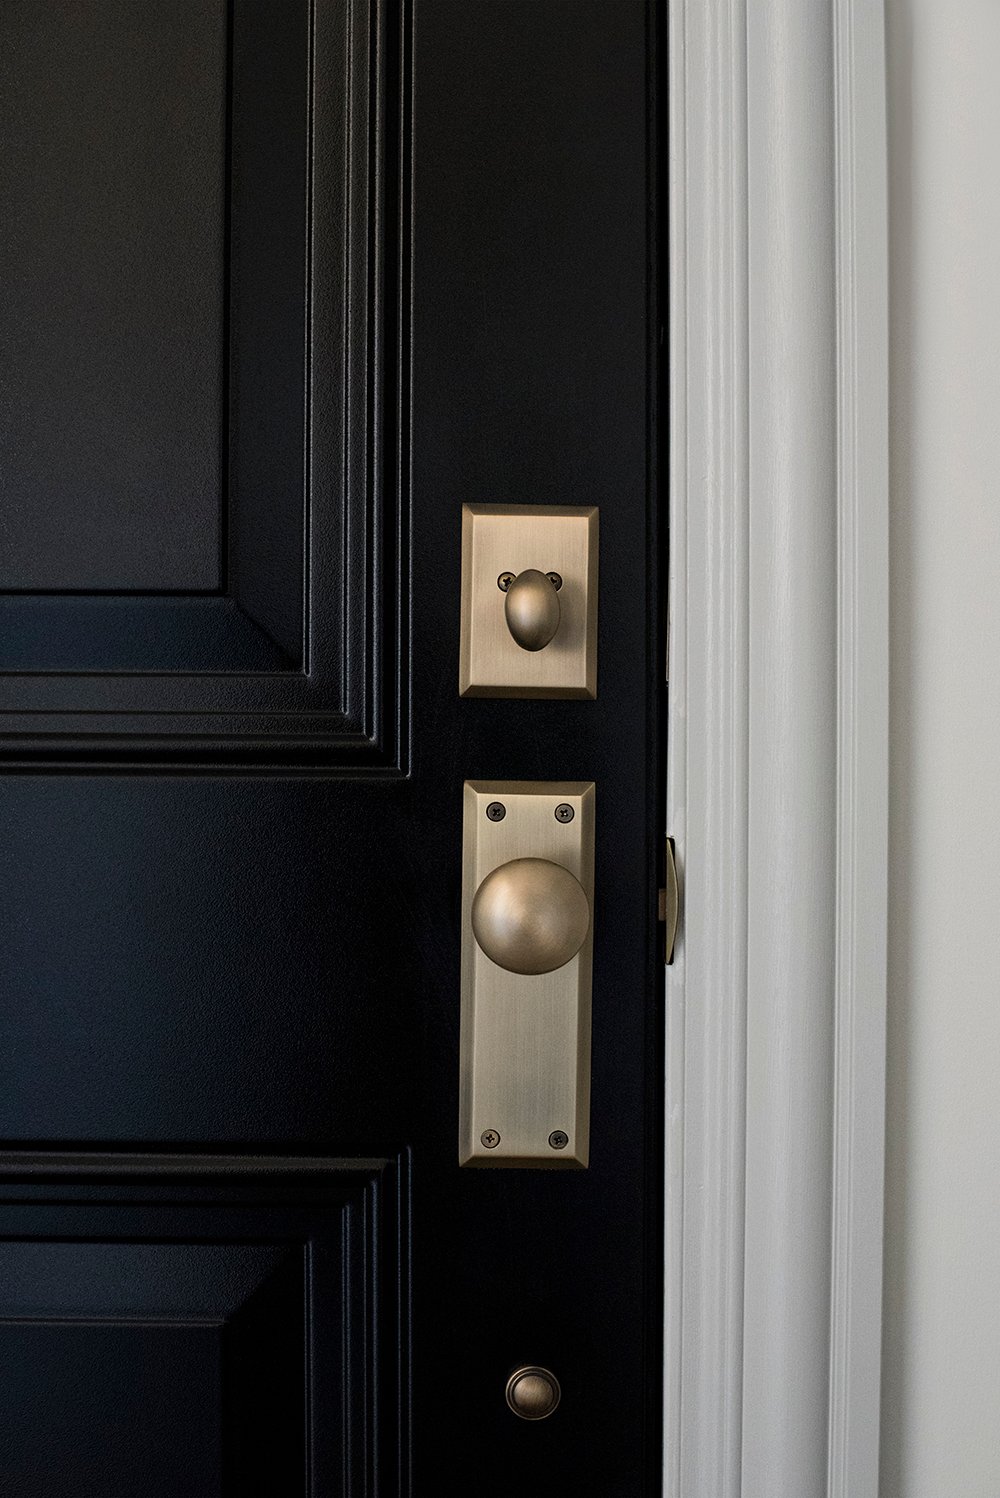 Brass Hardware on Black Exterior Door Room For Tuesday